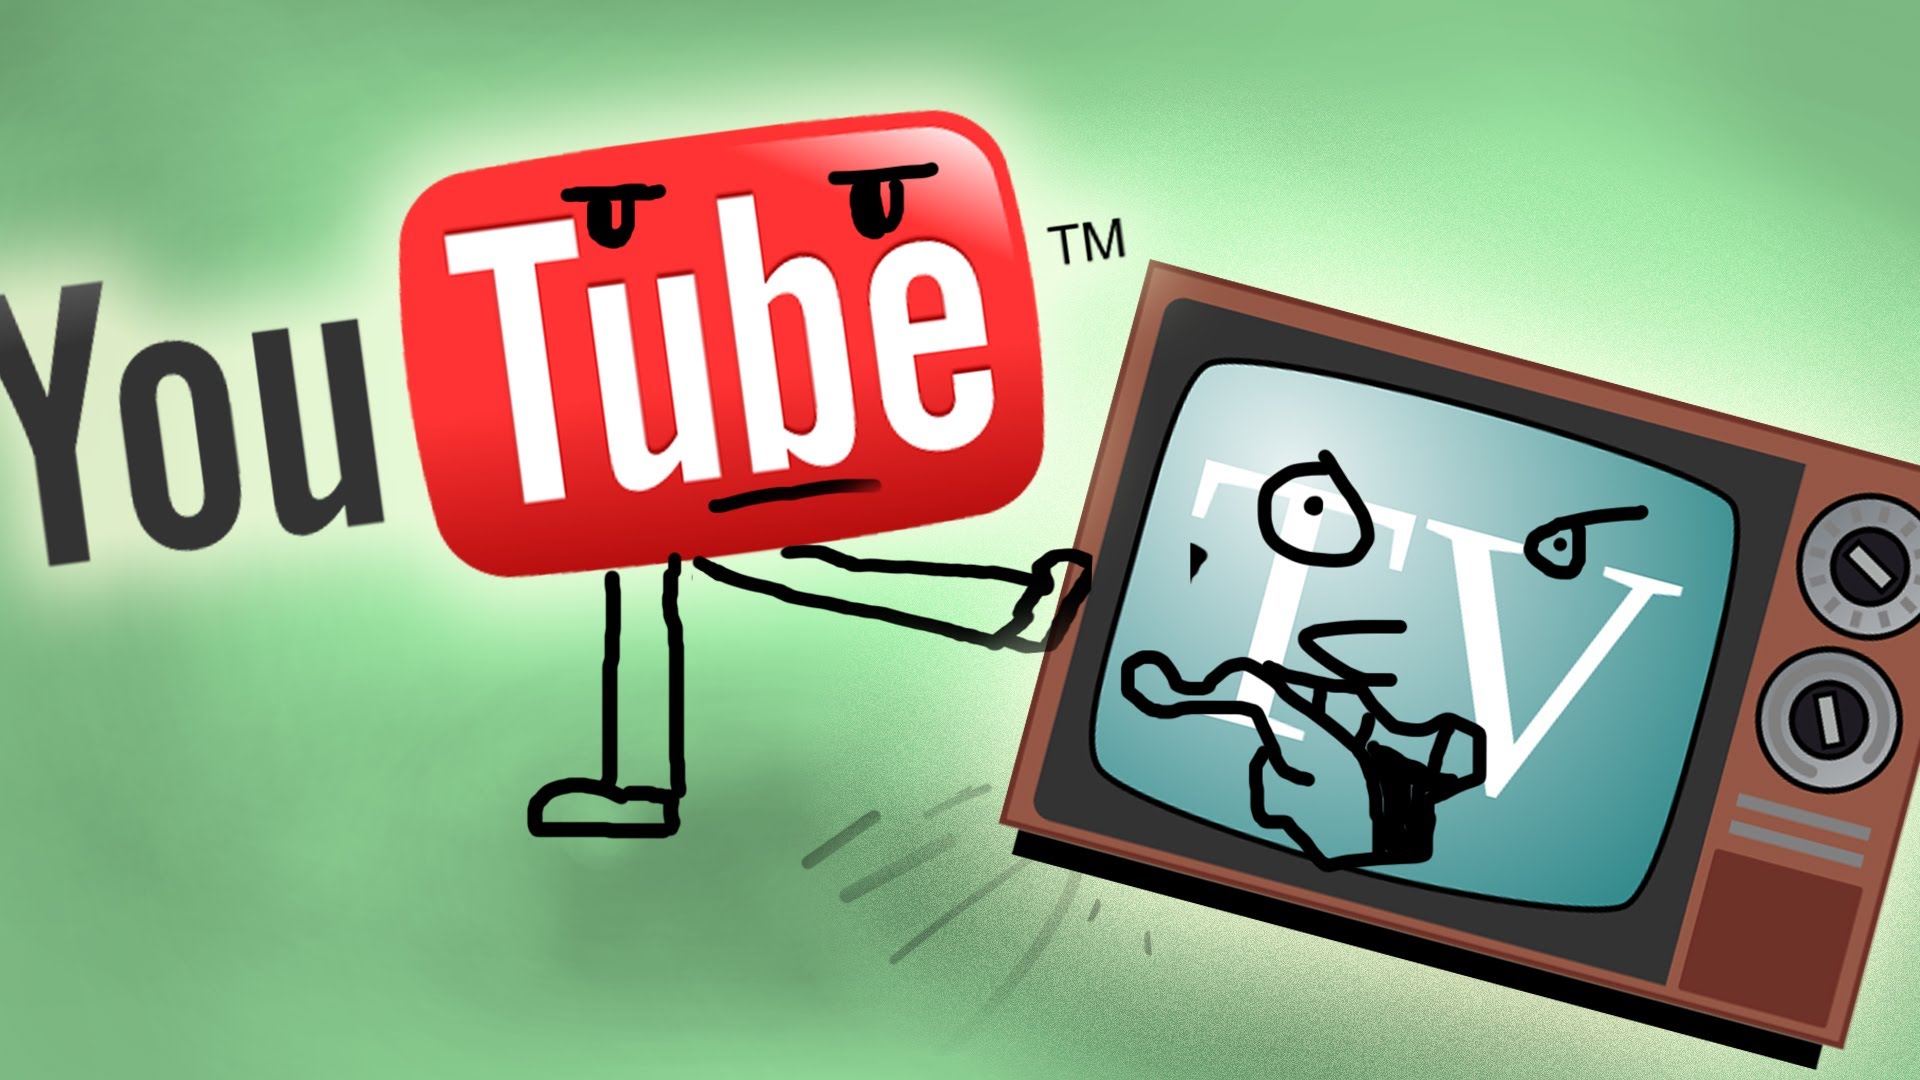 Youtube and Television